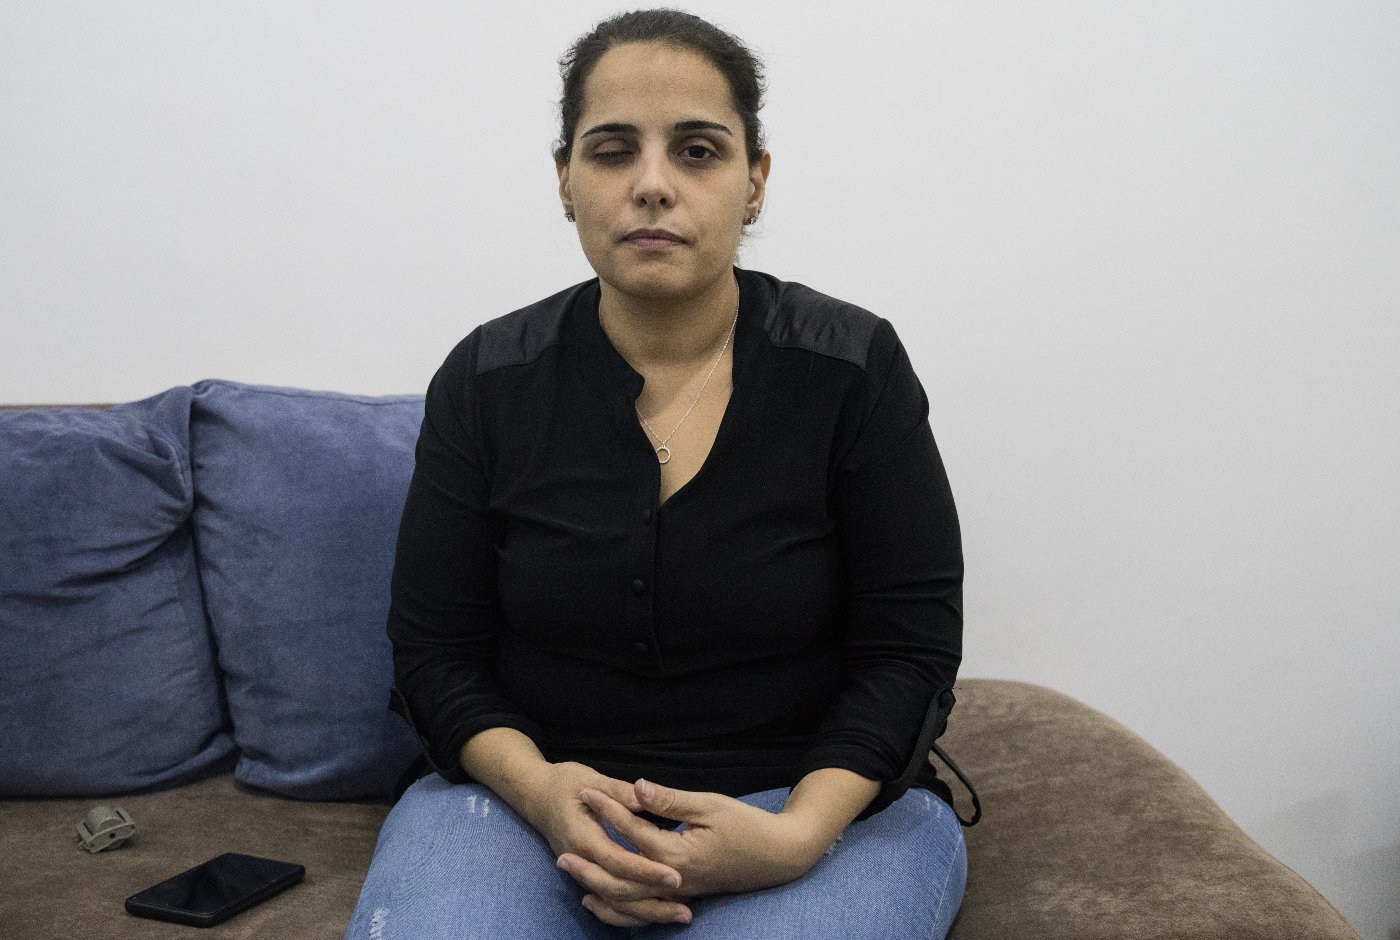 For Mirna Habboush, one of the survivors of the Beirut explosion, 'there is no empathy from the government' (MEE/Clément Gibon)